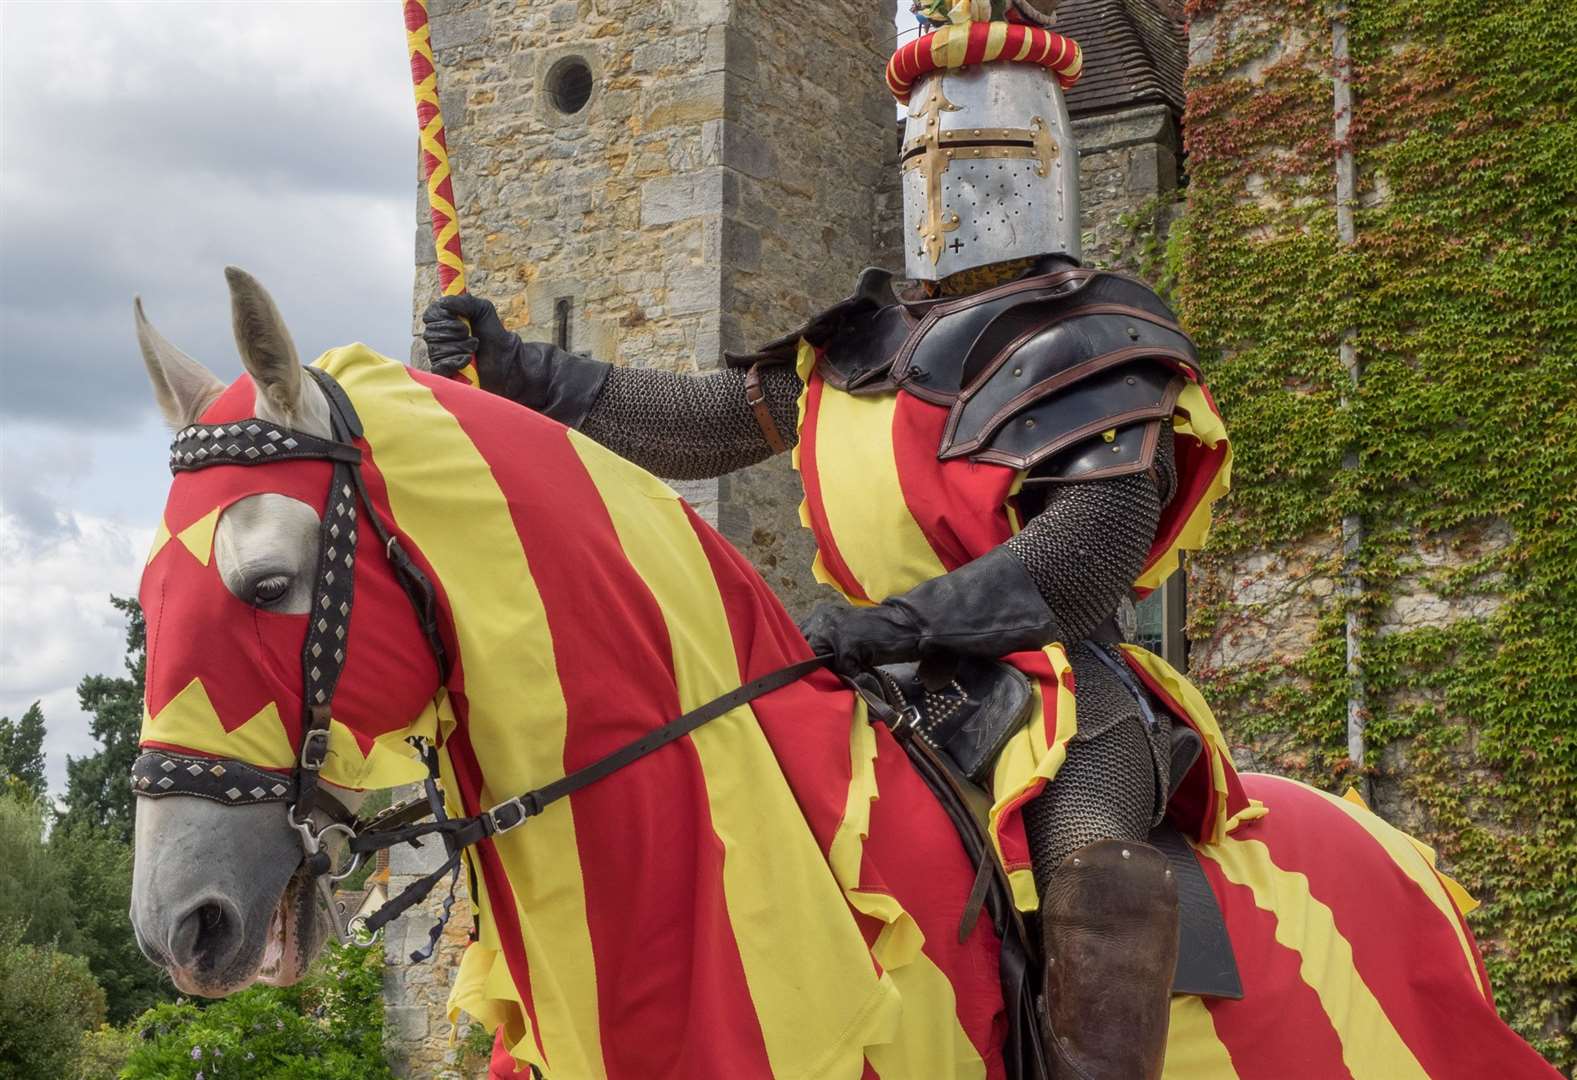 Families wishing to watch the jousting will need to book